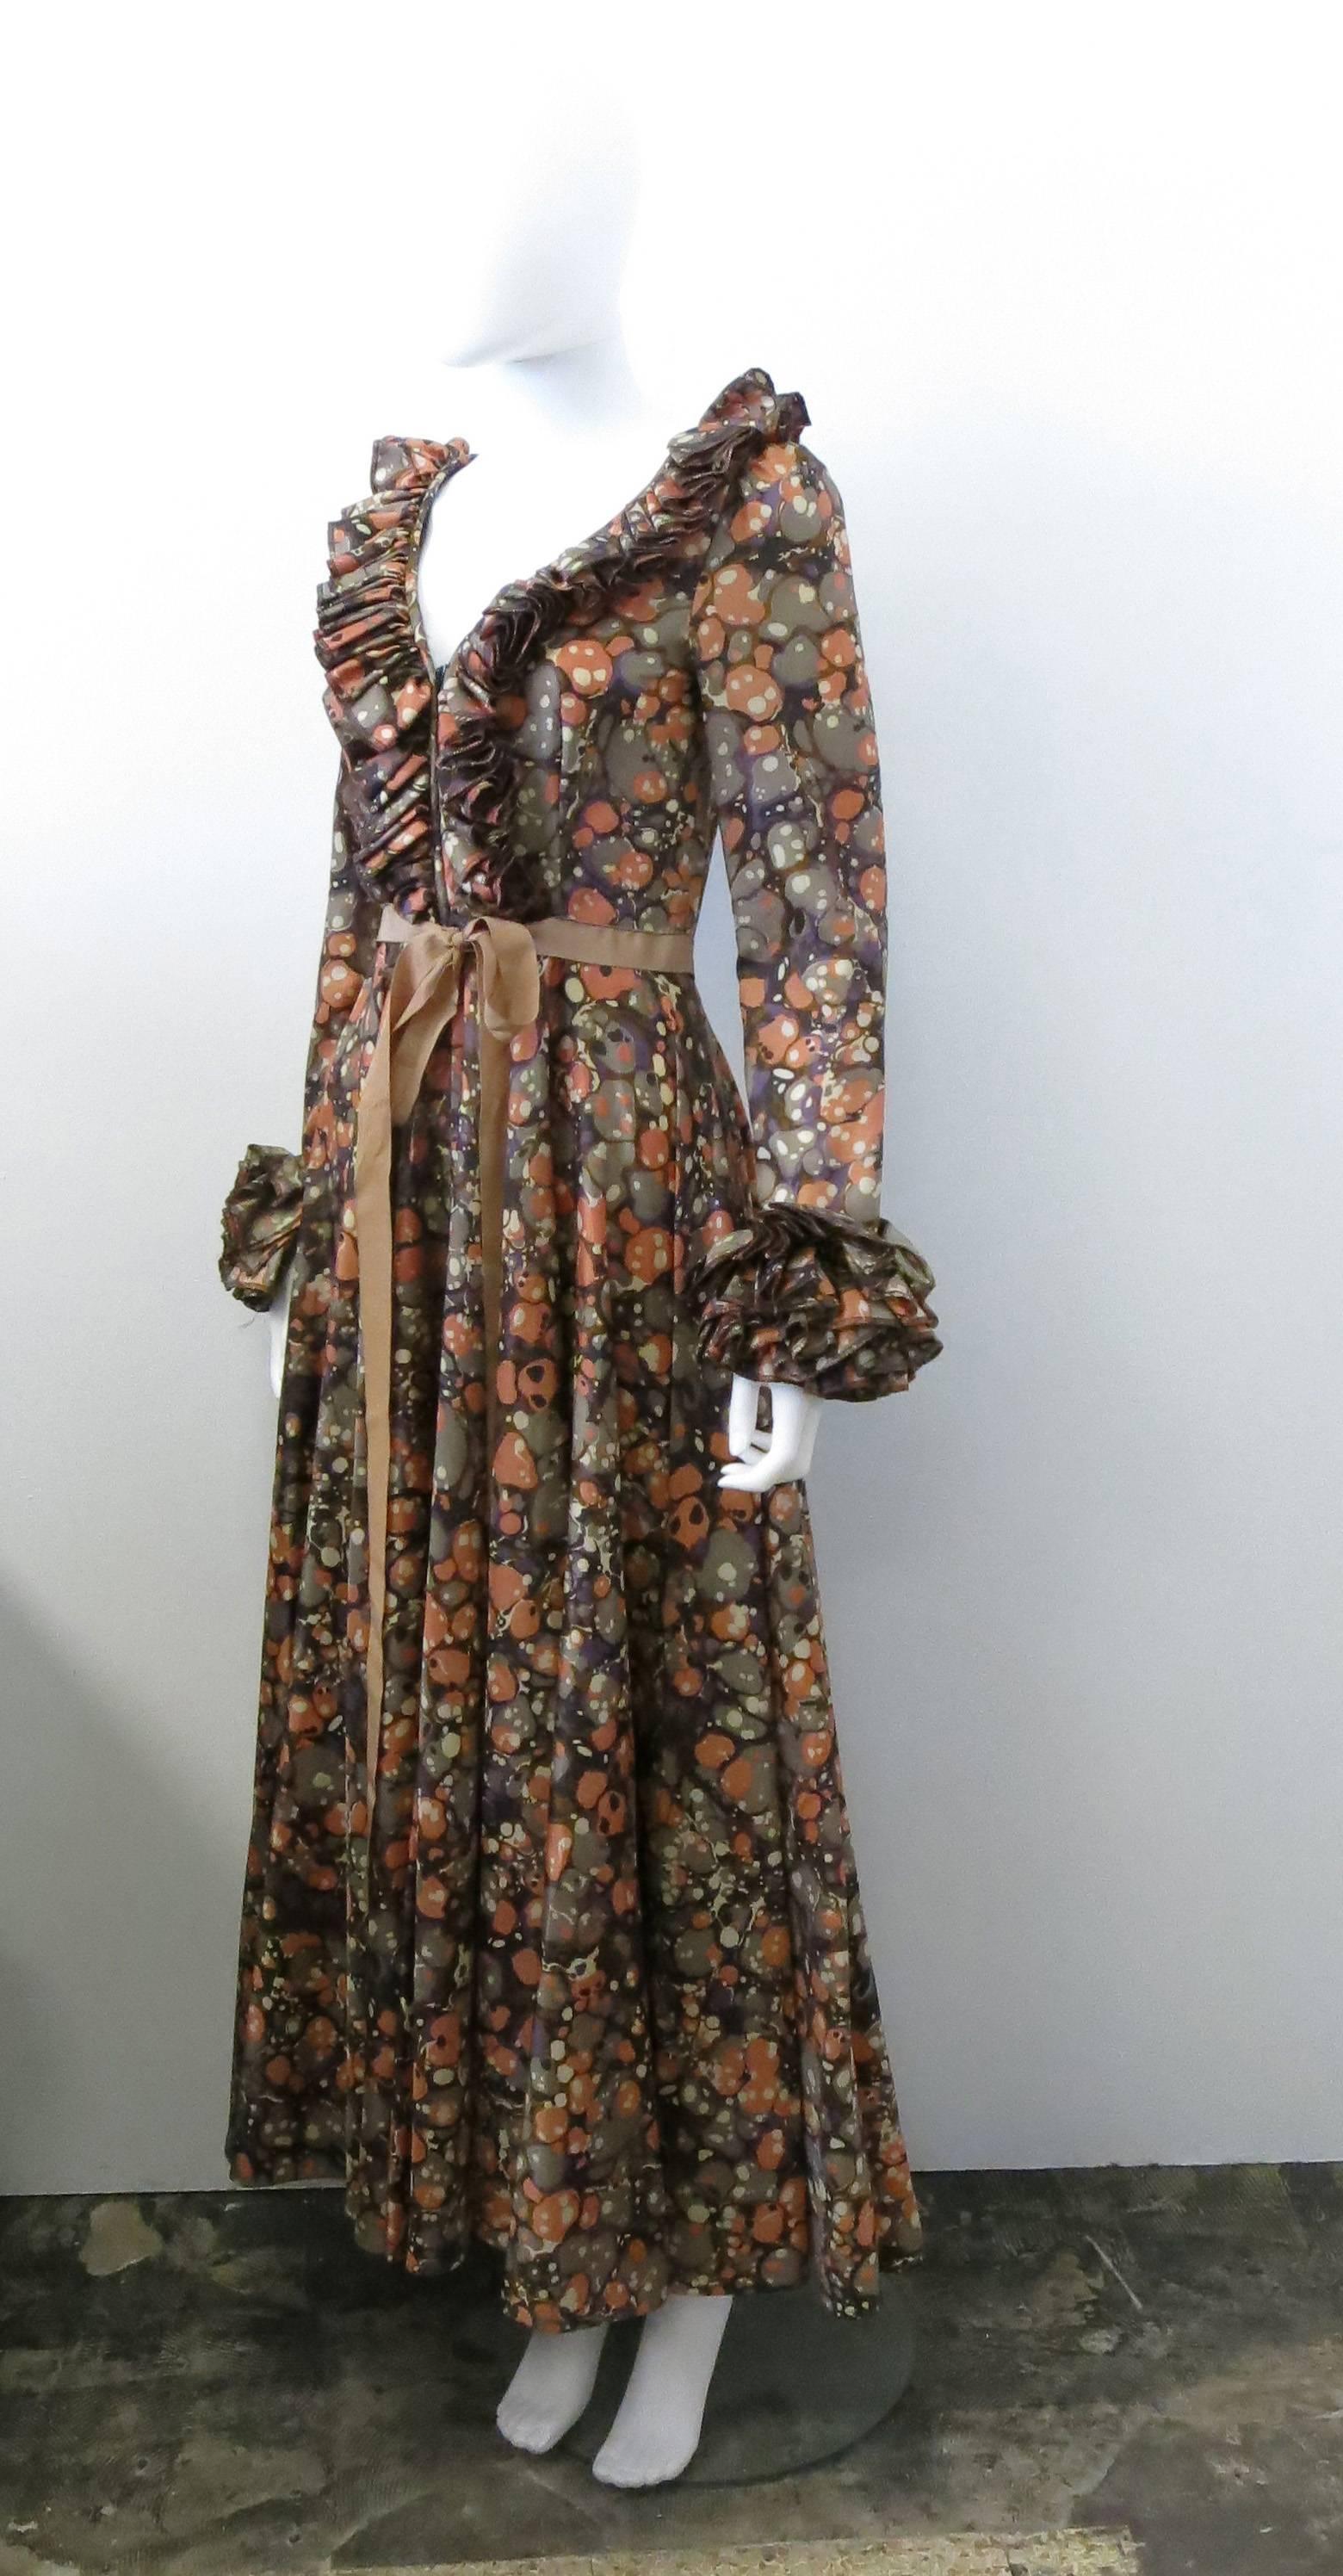 A multicolour, psychedlic print vintage  dress by British label Jean Varon dating from the 1970’s.The dress has a beautiful period silhouette, with ruffled V-neck collar, cinched waist, tie belt and long sleeves with ruffle cuffs, The skirt falls to